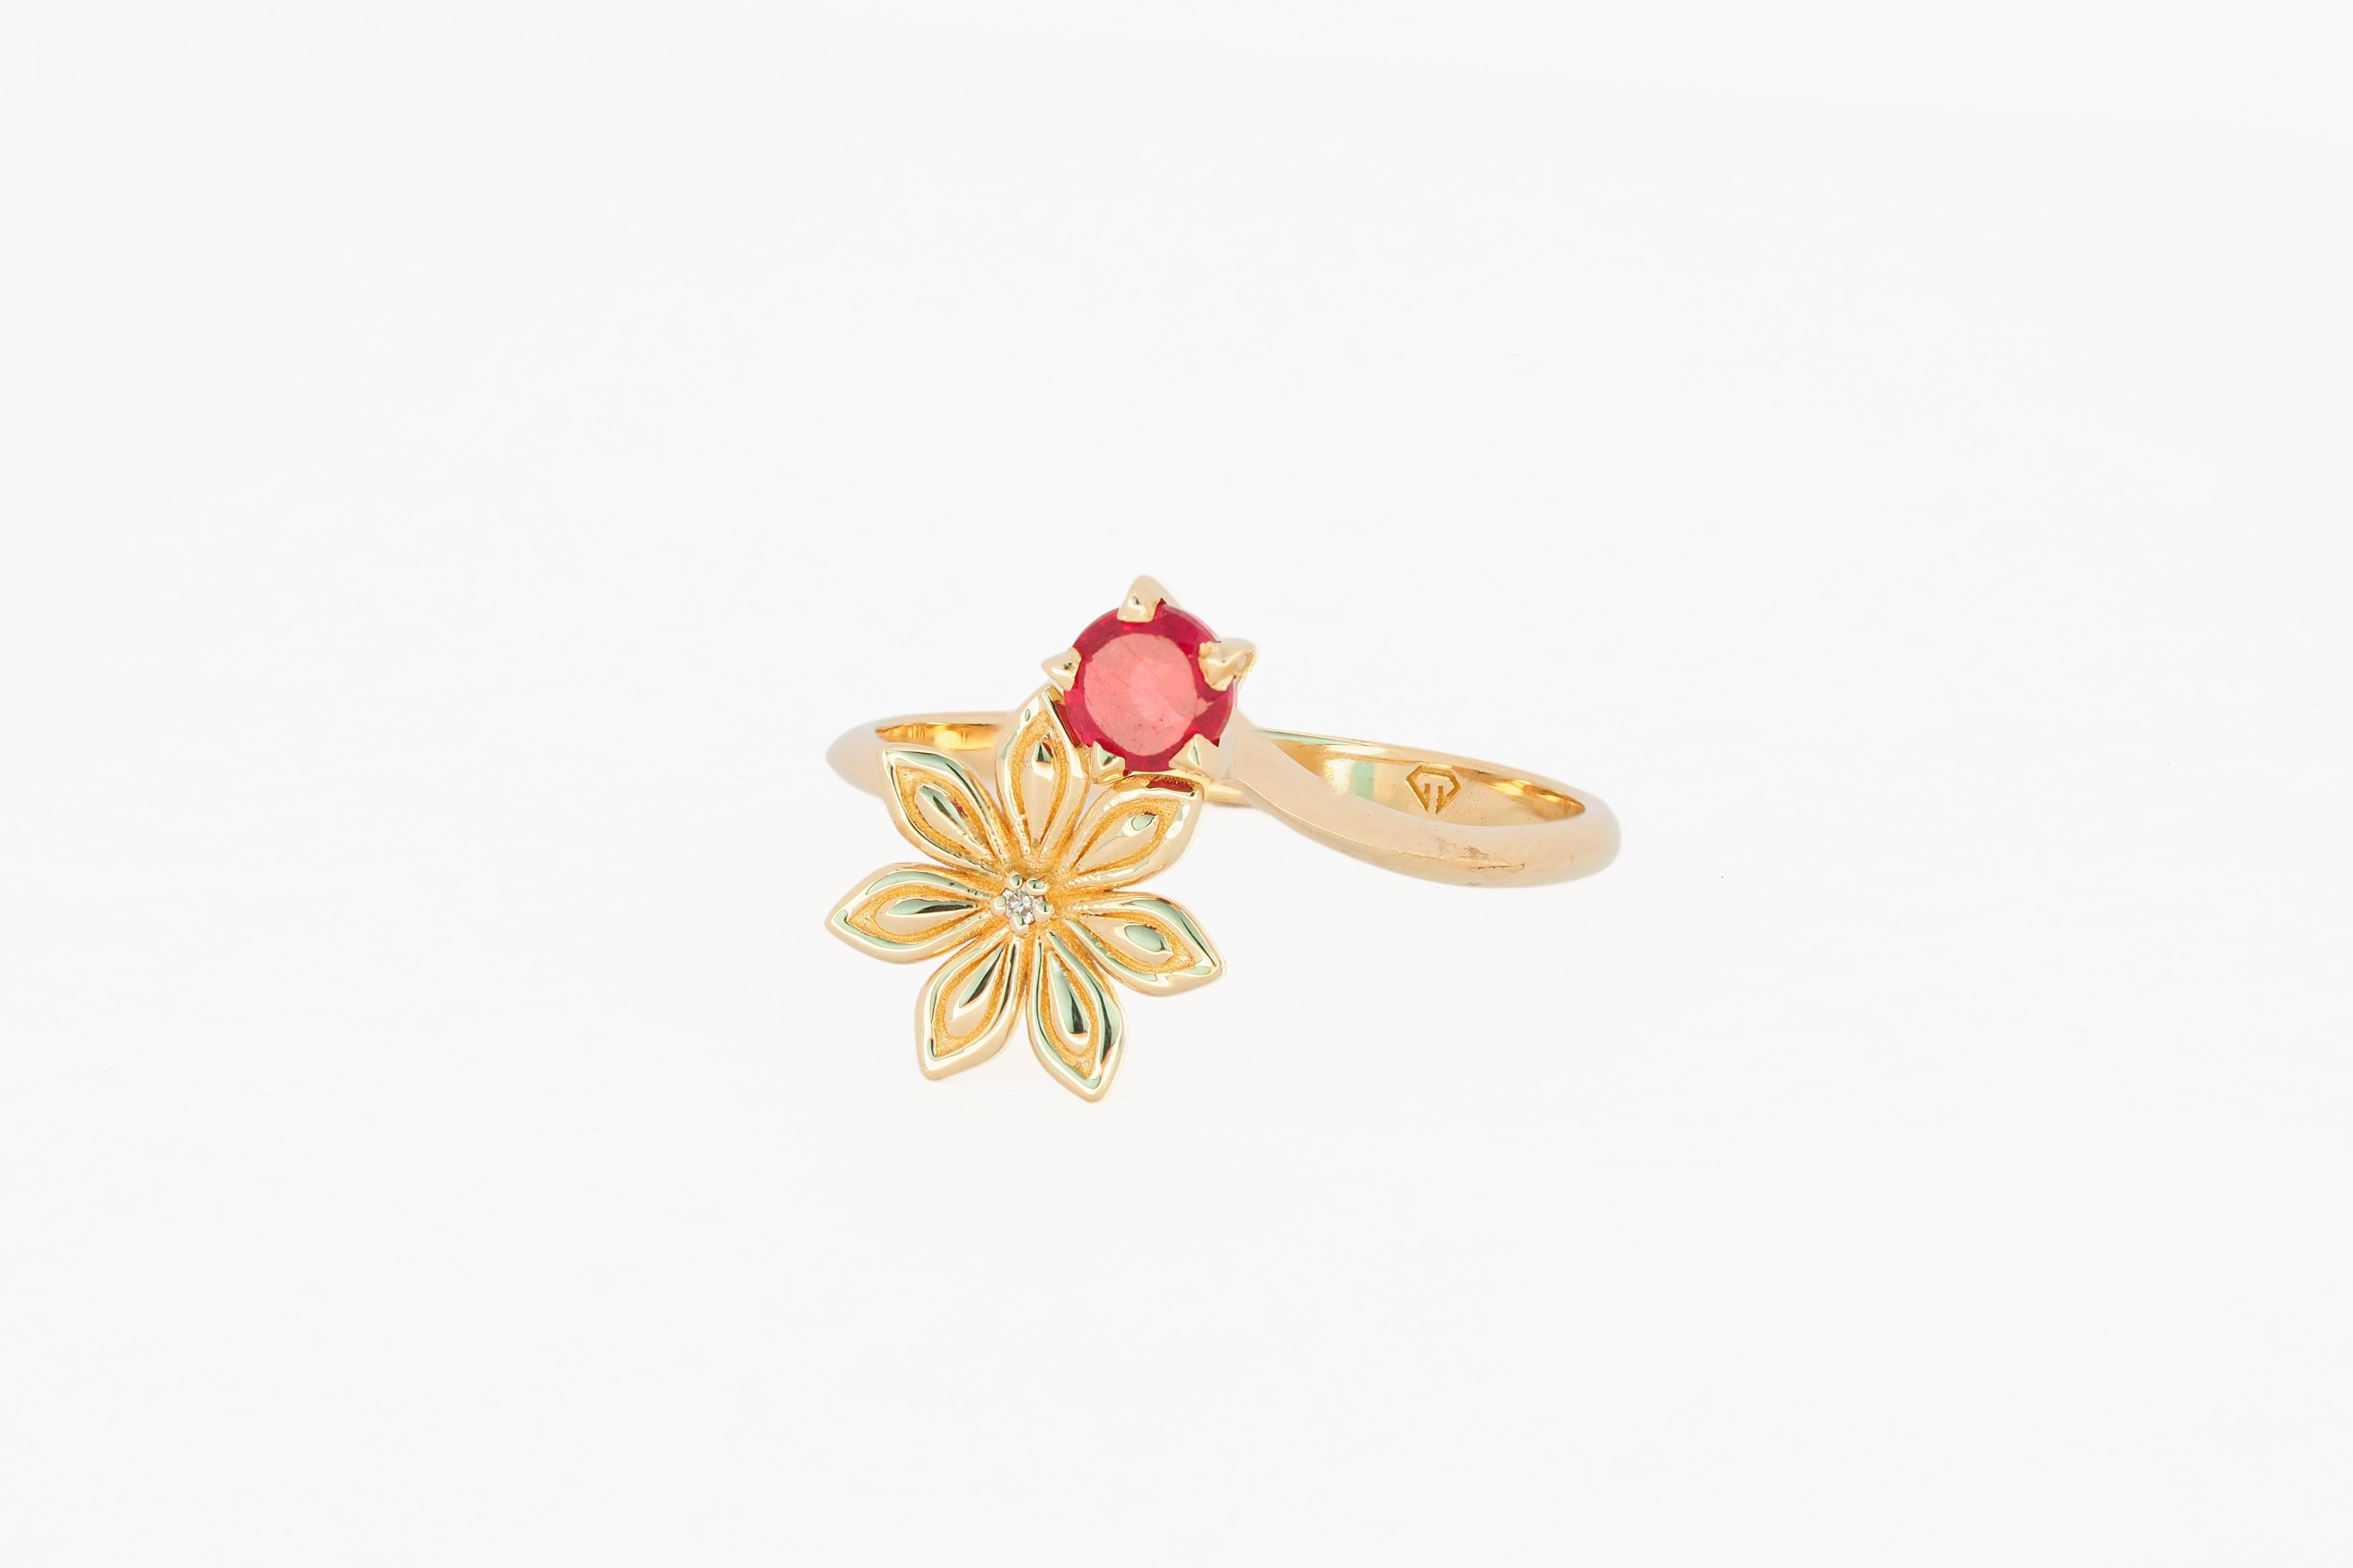 For Sale:   Ruby gold ring. 14 Karat Gold Star Anise Flower Ring. July birthstone ruby ring 6